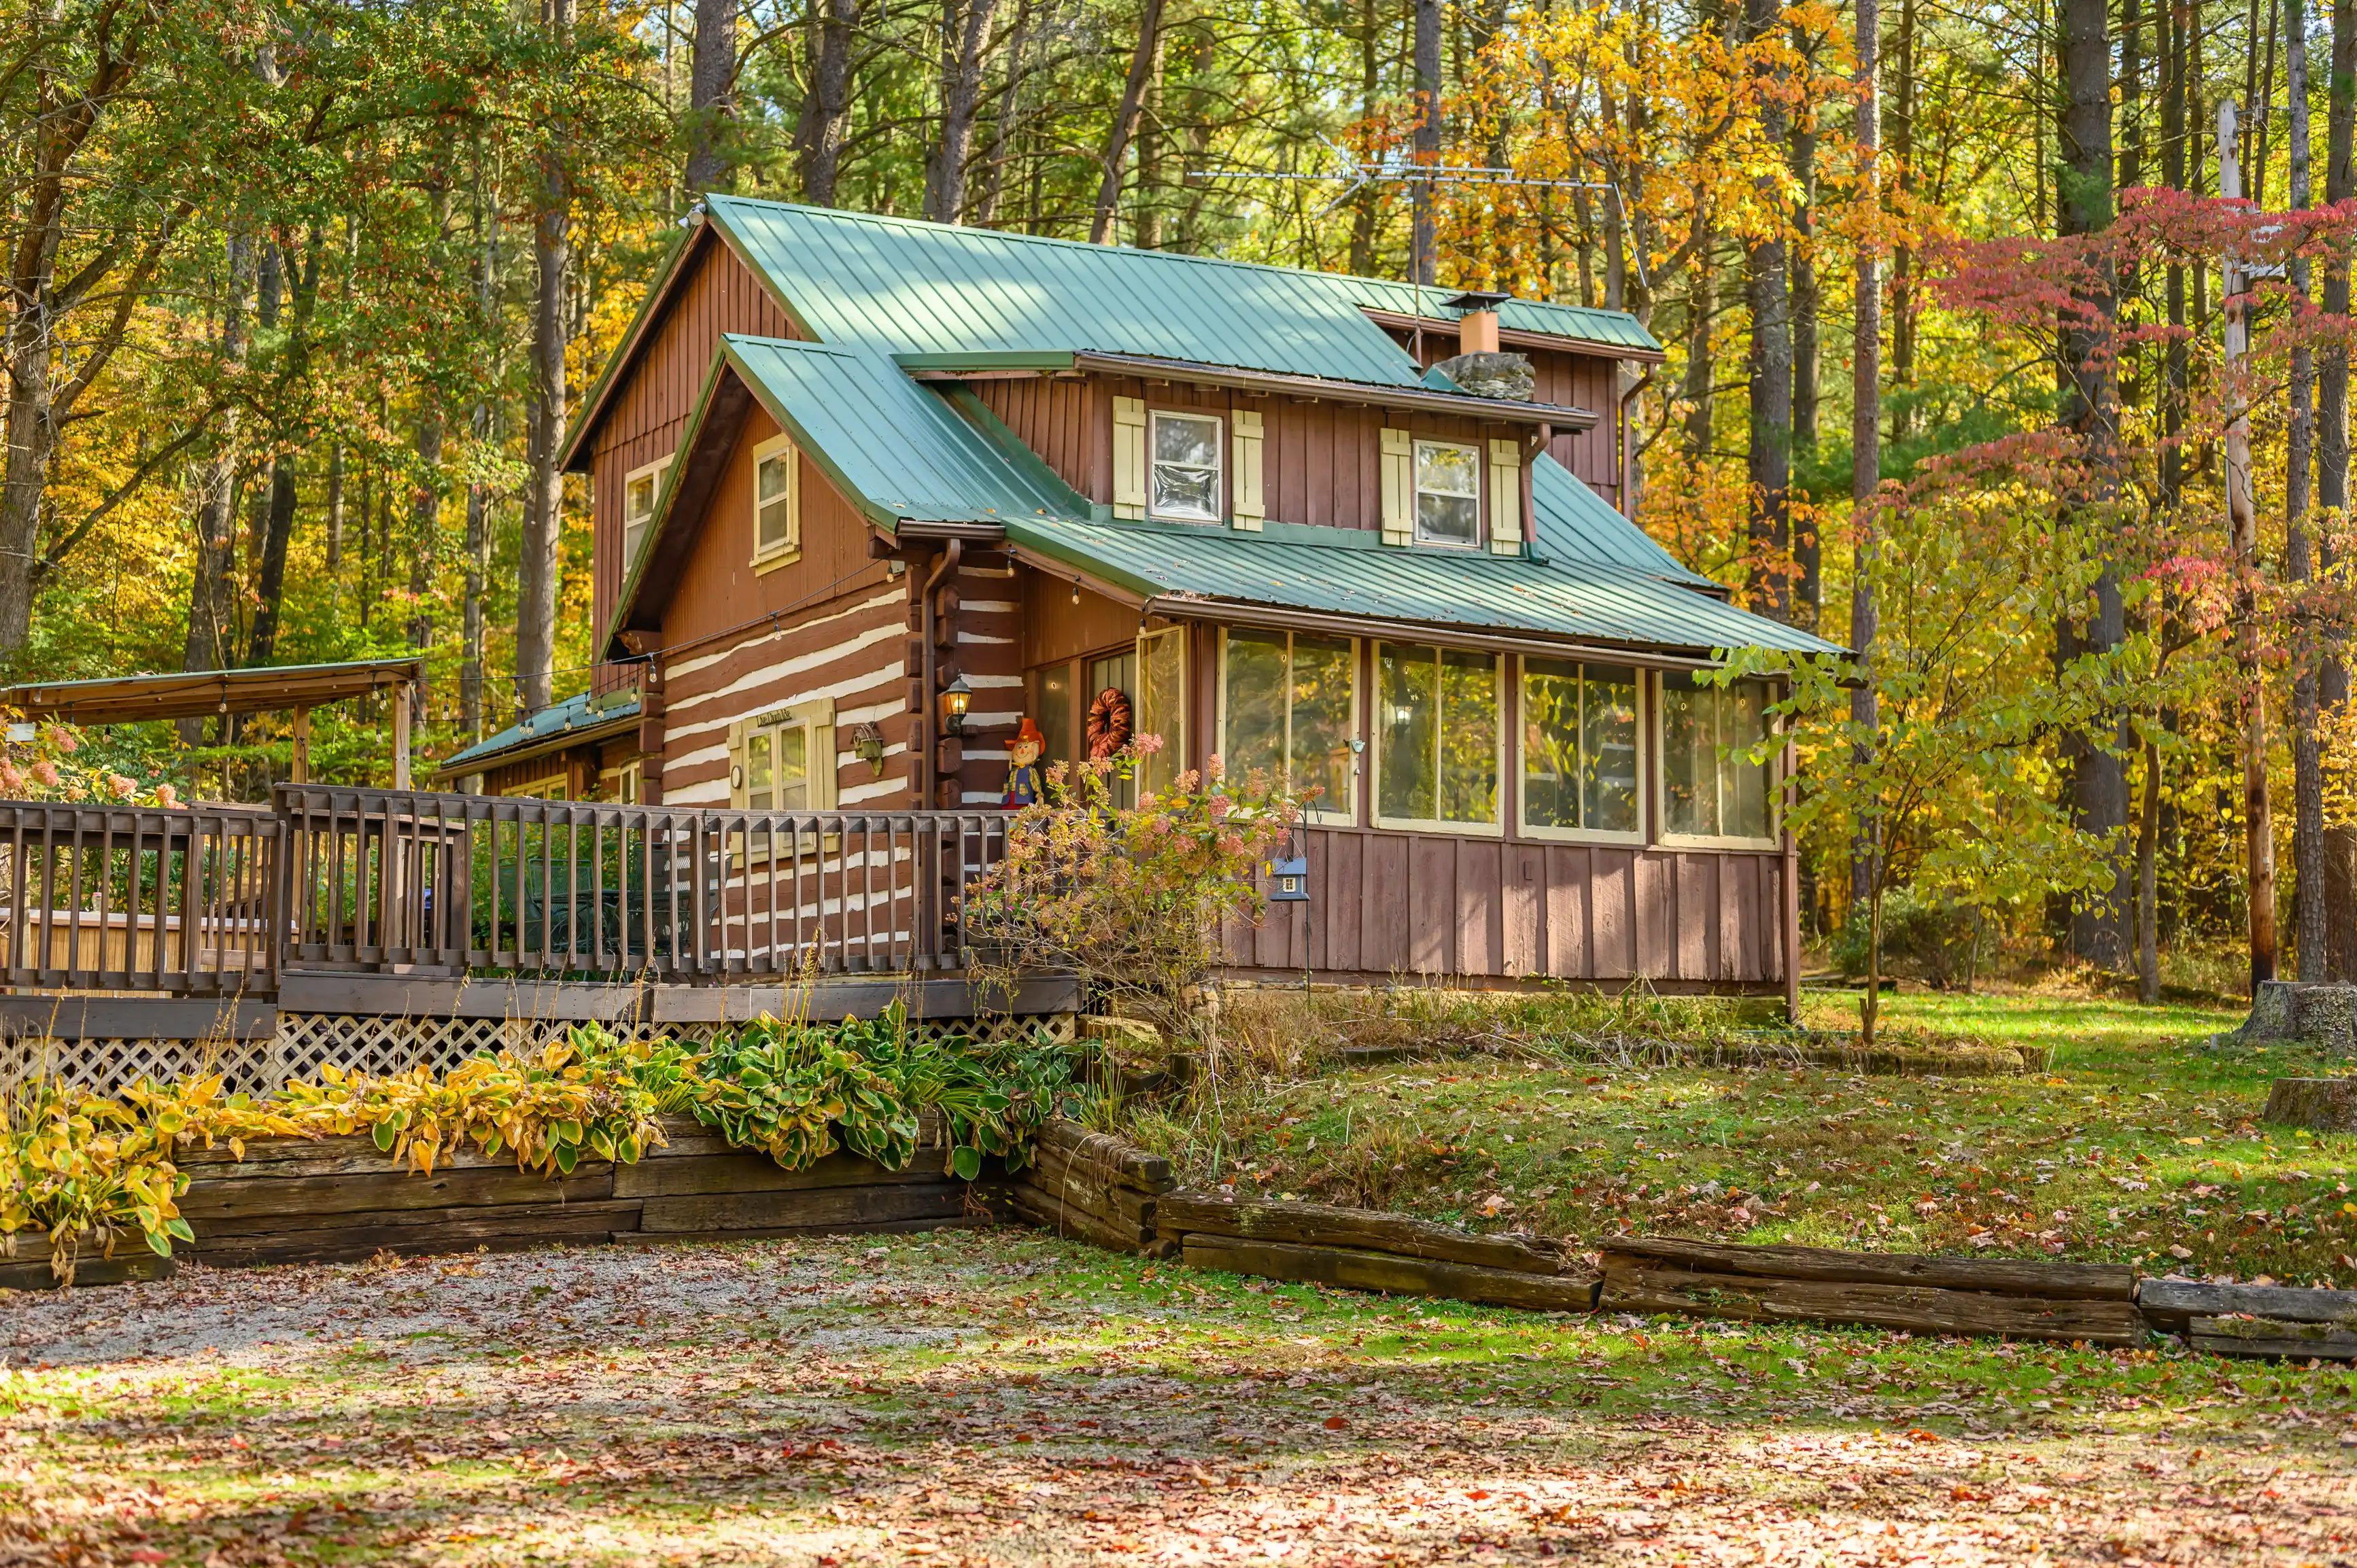 Wooden cabin surrounded by autumn foliage in a forest setting.